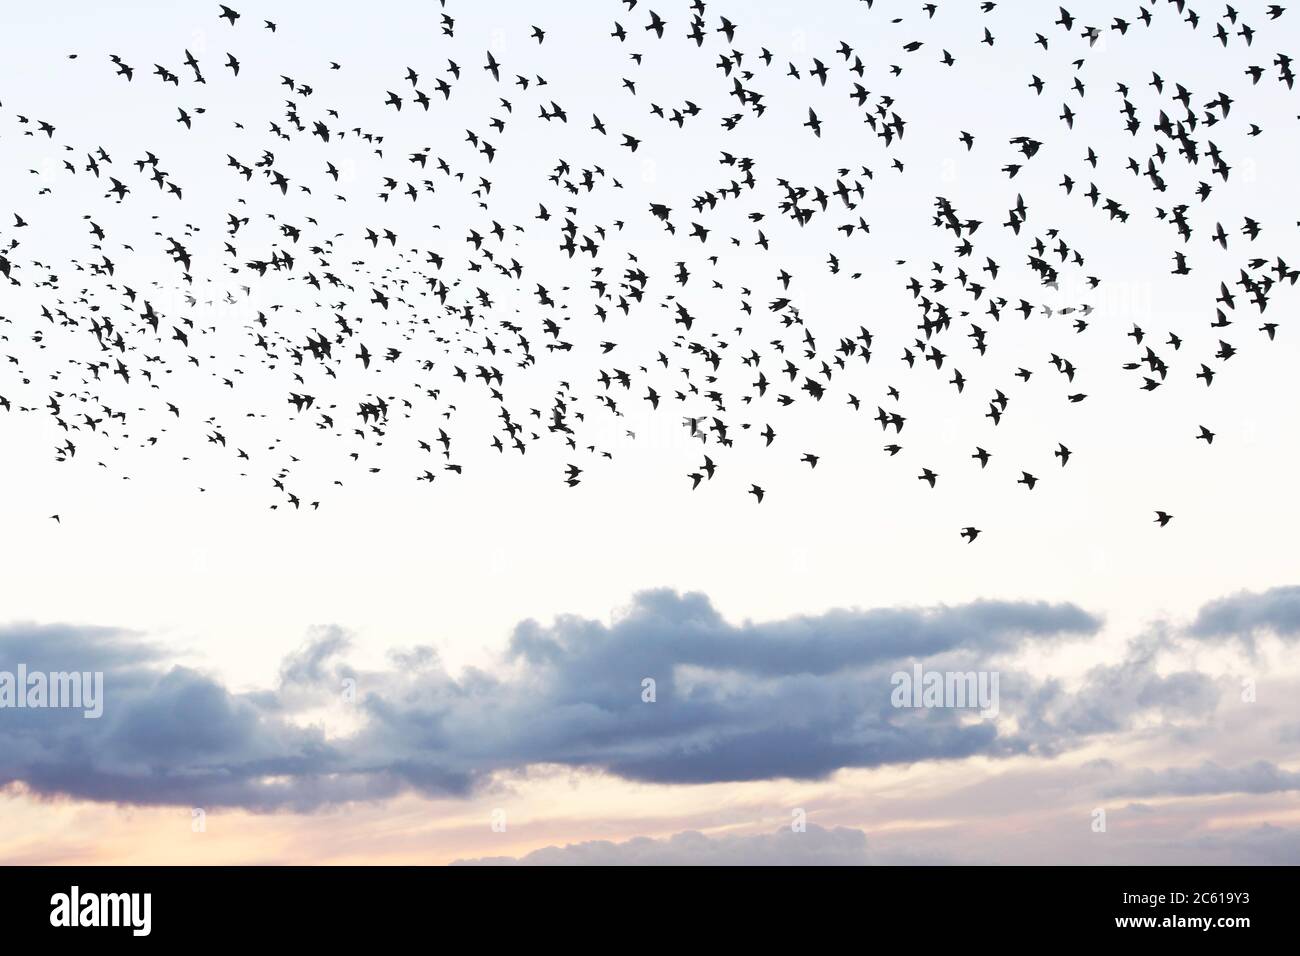 Collection of Starlings as a mumeration in Wick, Caithness Scotland Stock Photo